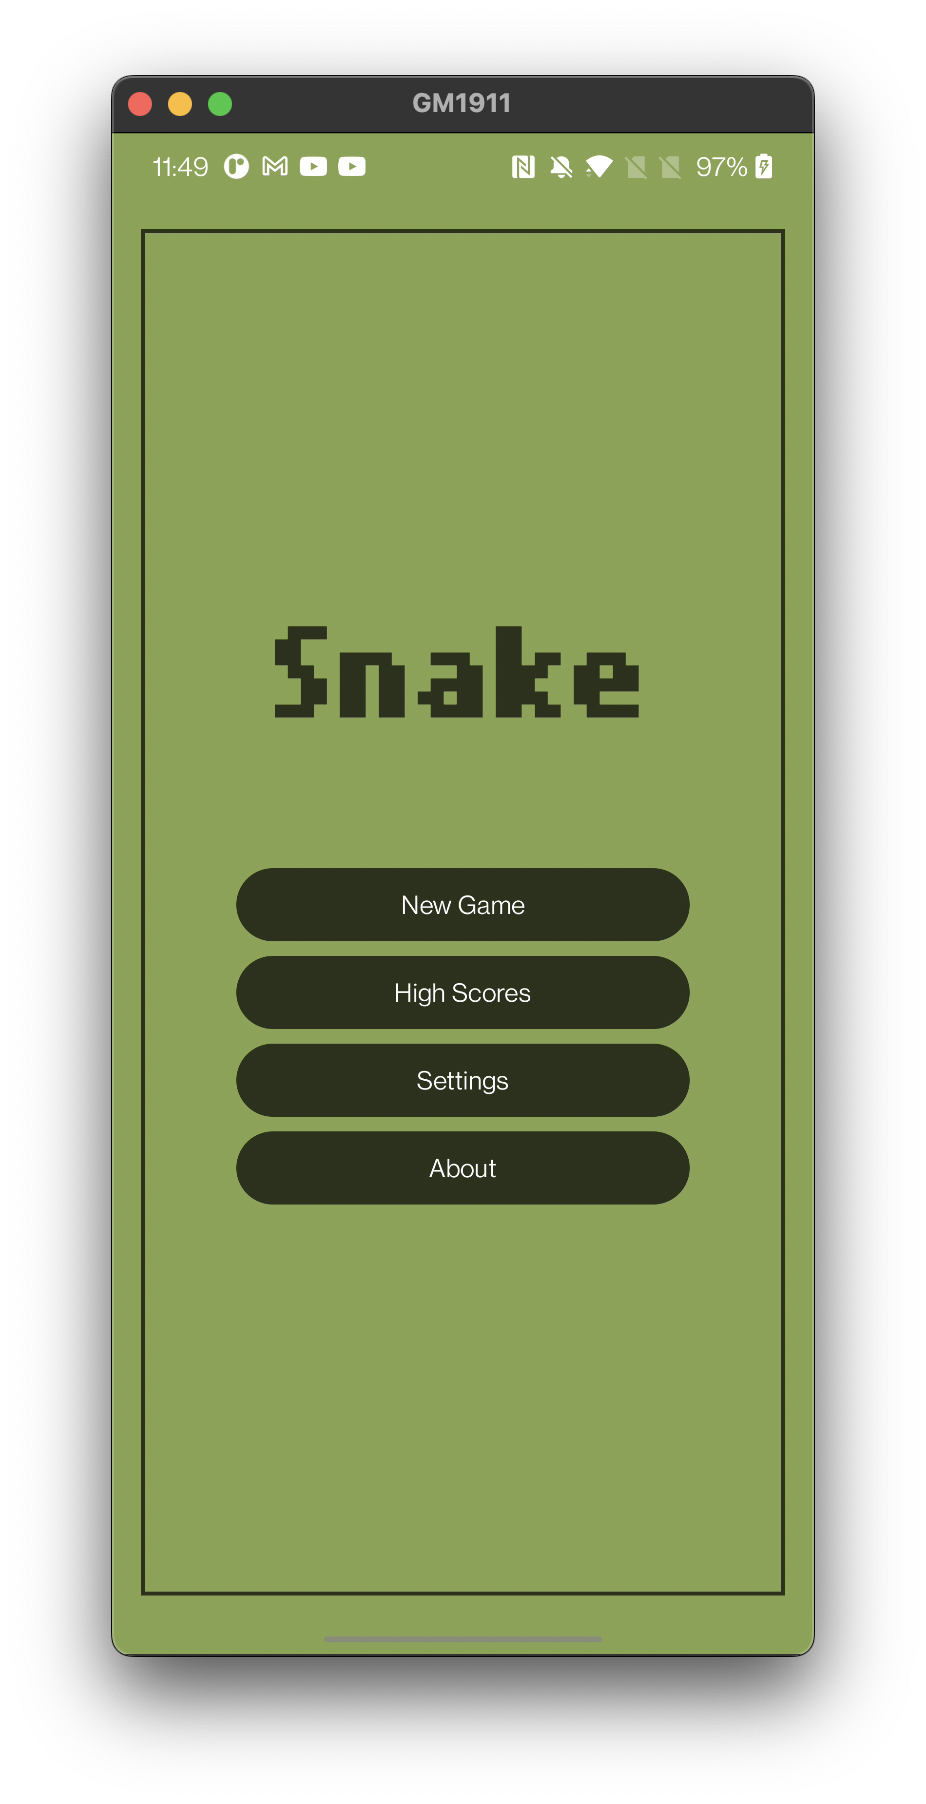 Classic Snake Game with Jetpack Compose., by Mukesh Solanki